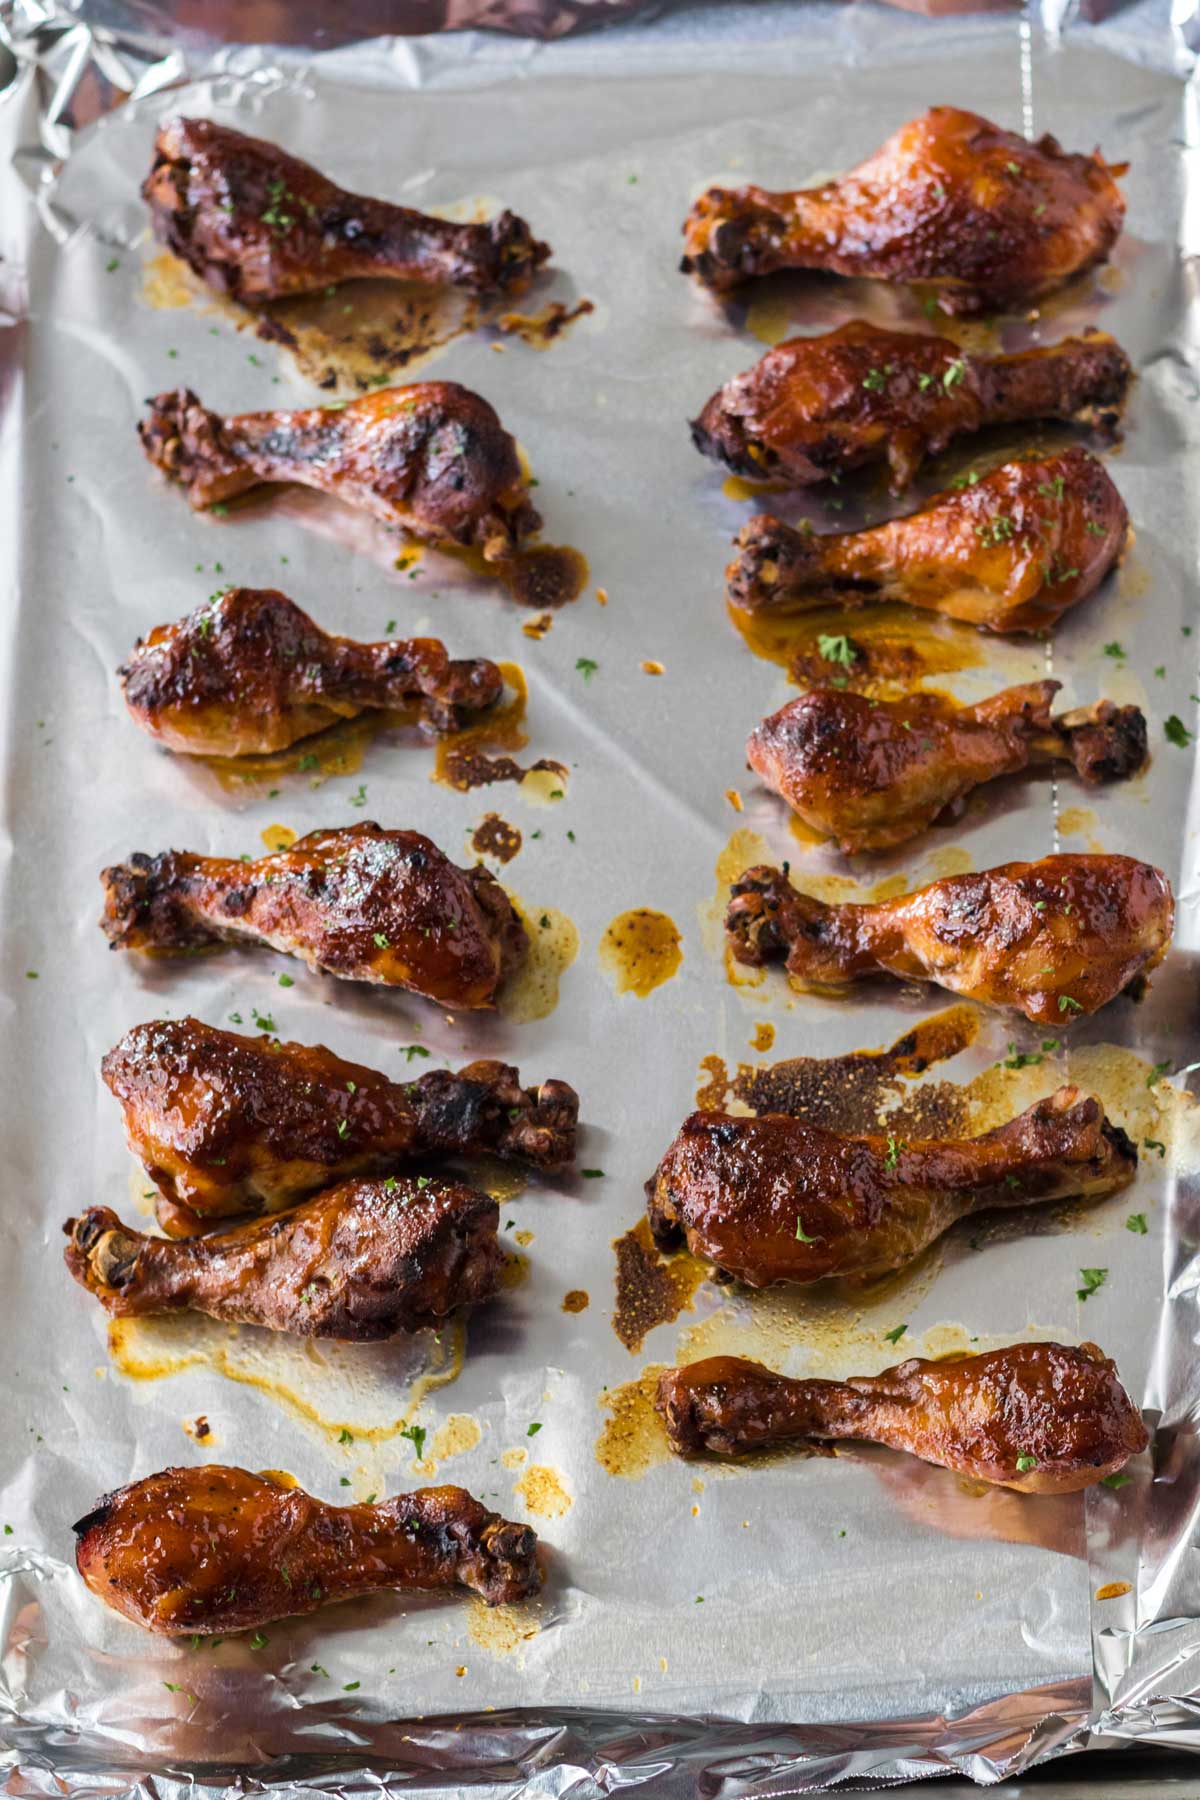 Place the Crockpot BBQ Drumsticks in a tray and brush the remaining sauce over them.